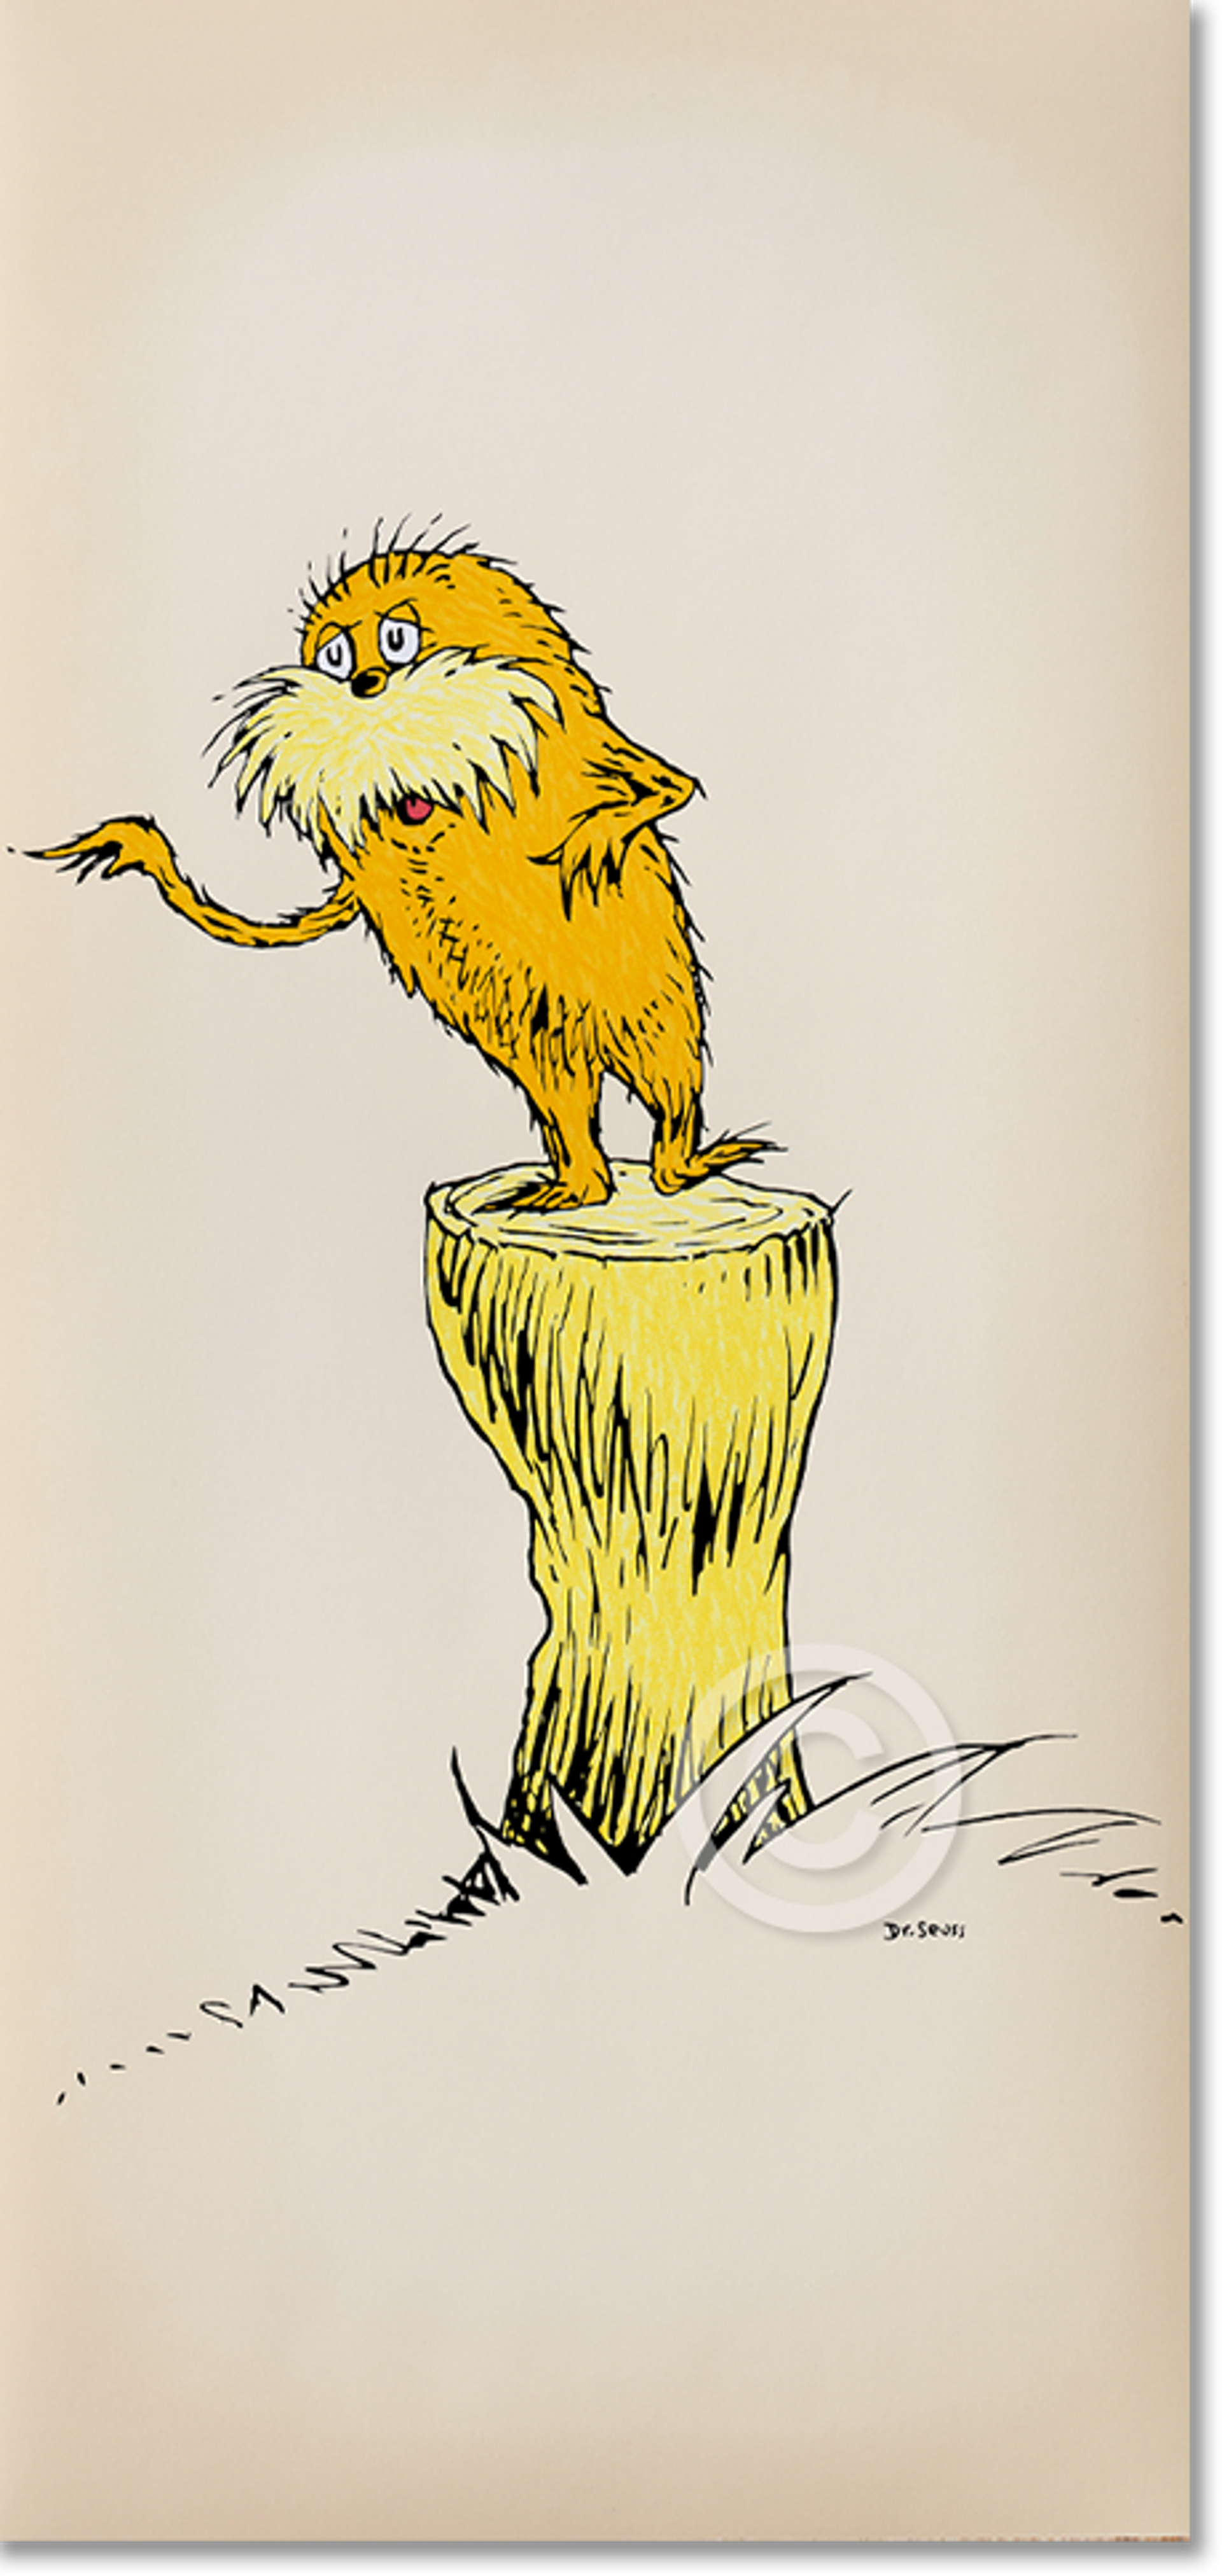 The Lorax - 50th Anniversary by Dr. Seuss